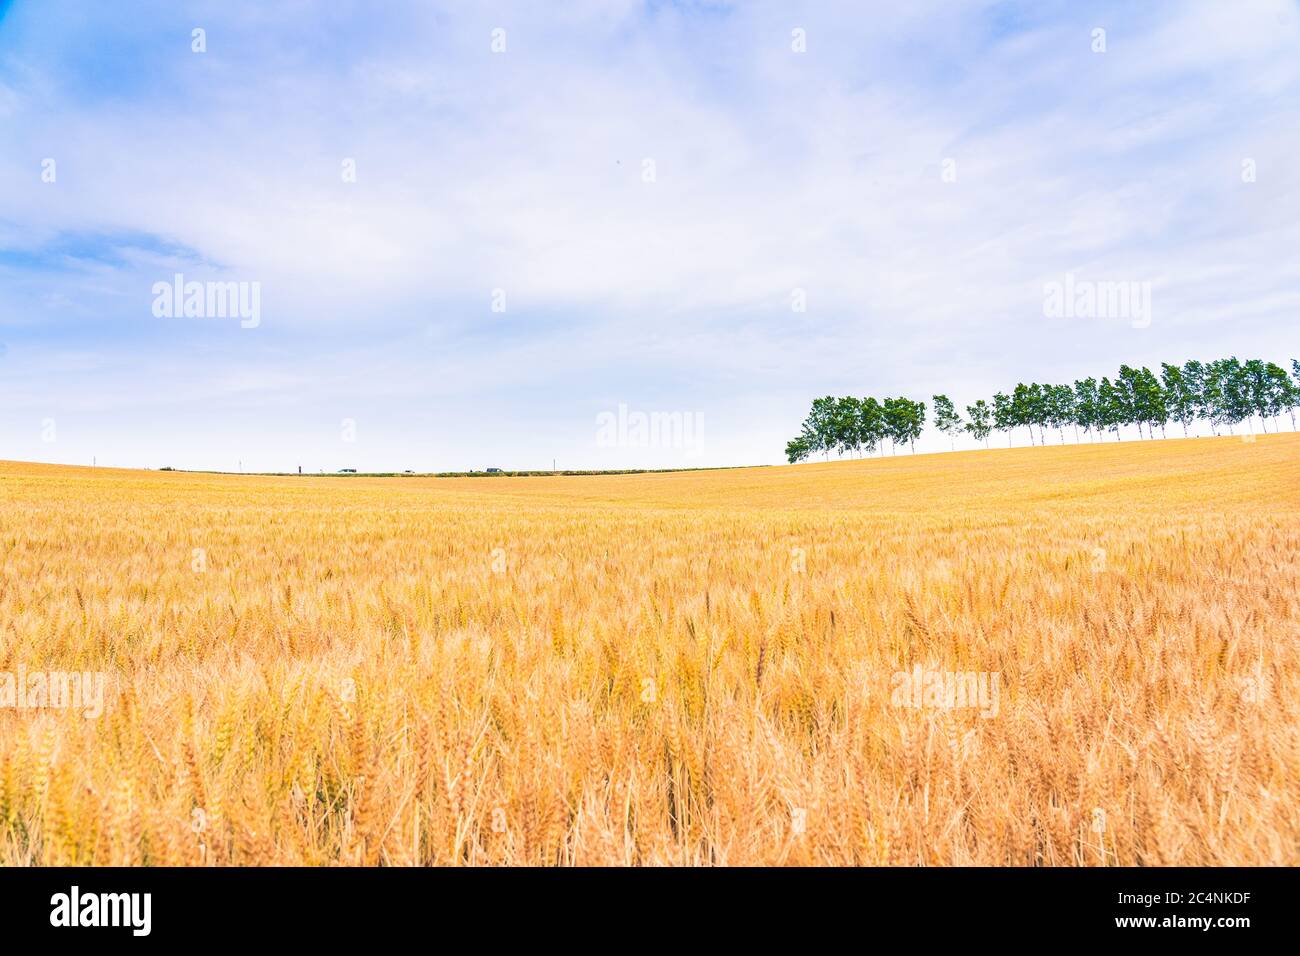 Barley golden fields and summer country side Scene background Stock Photo